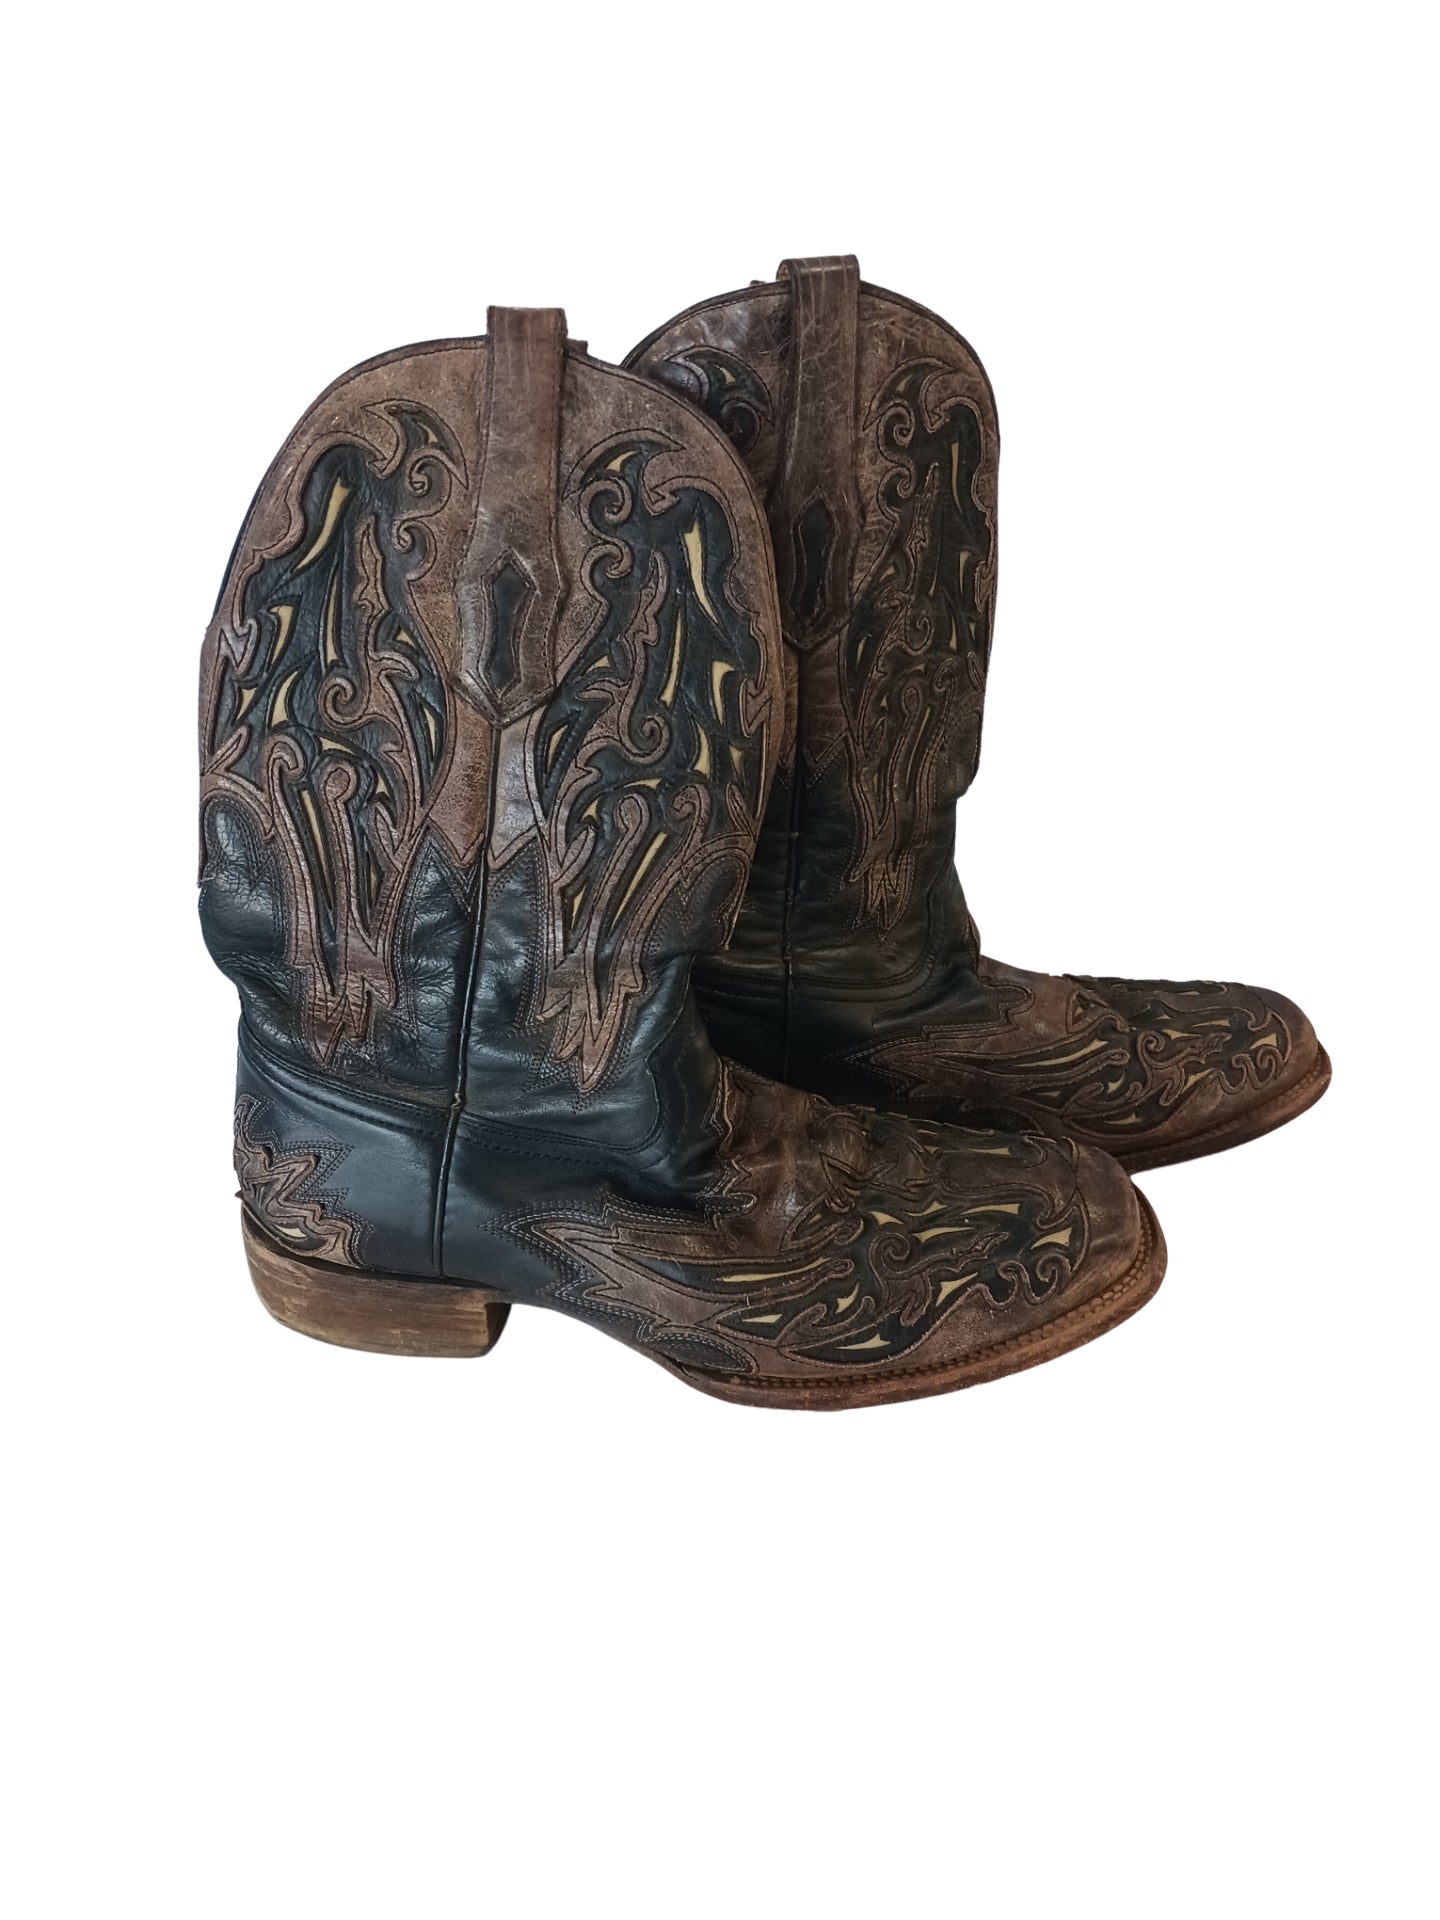 Corral Mens Western Boots, Size 10